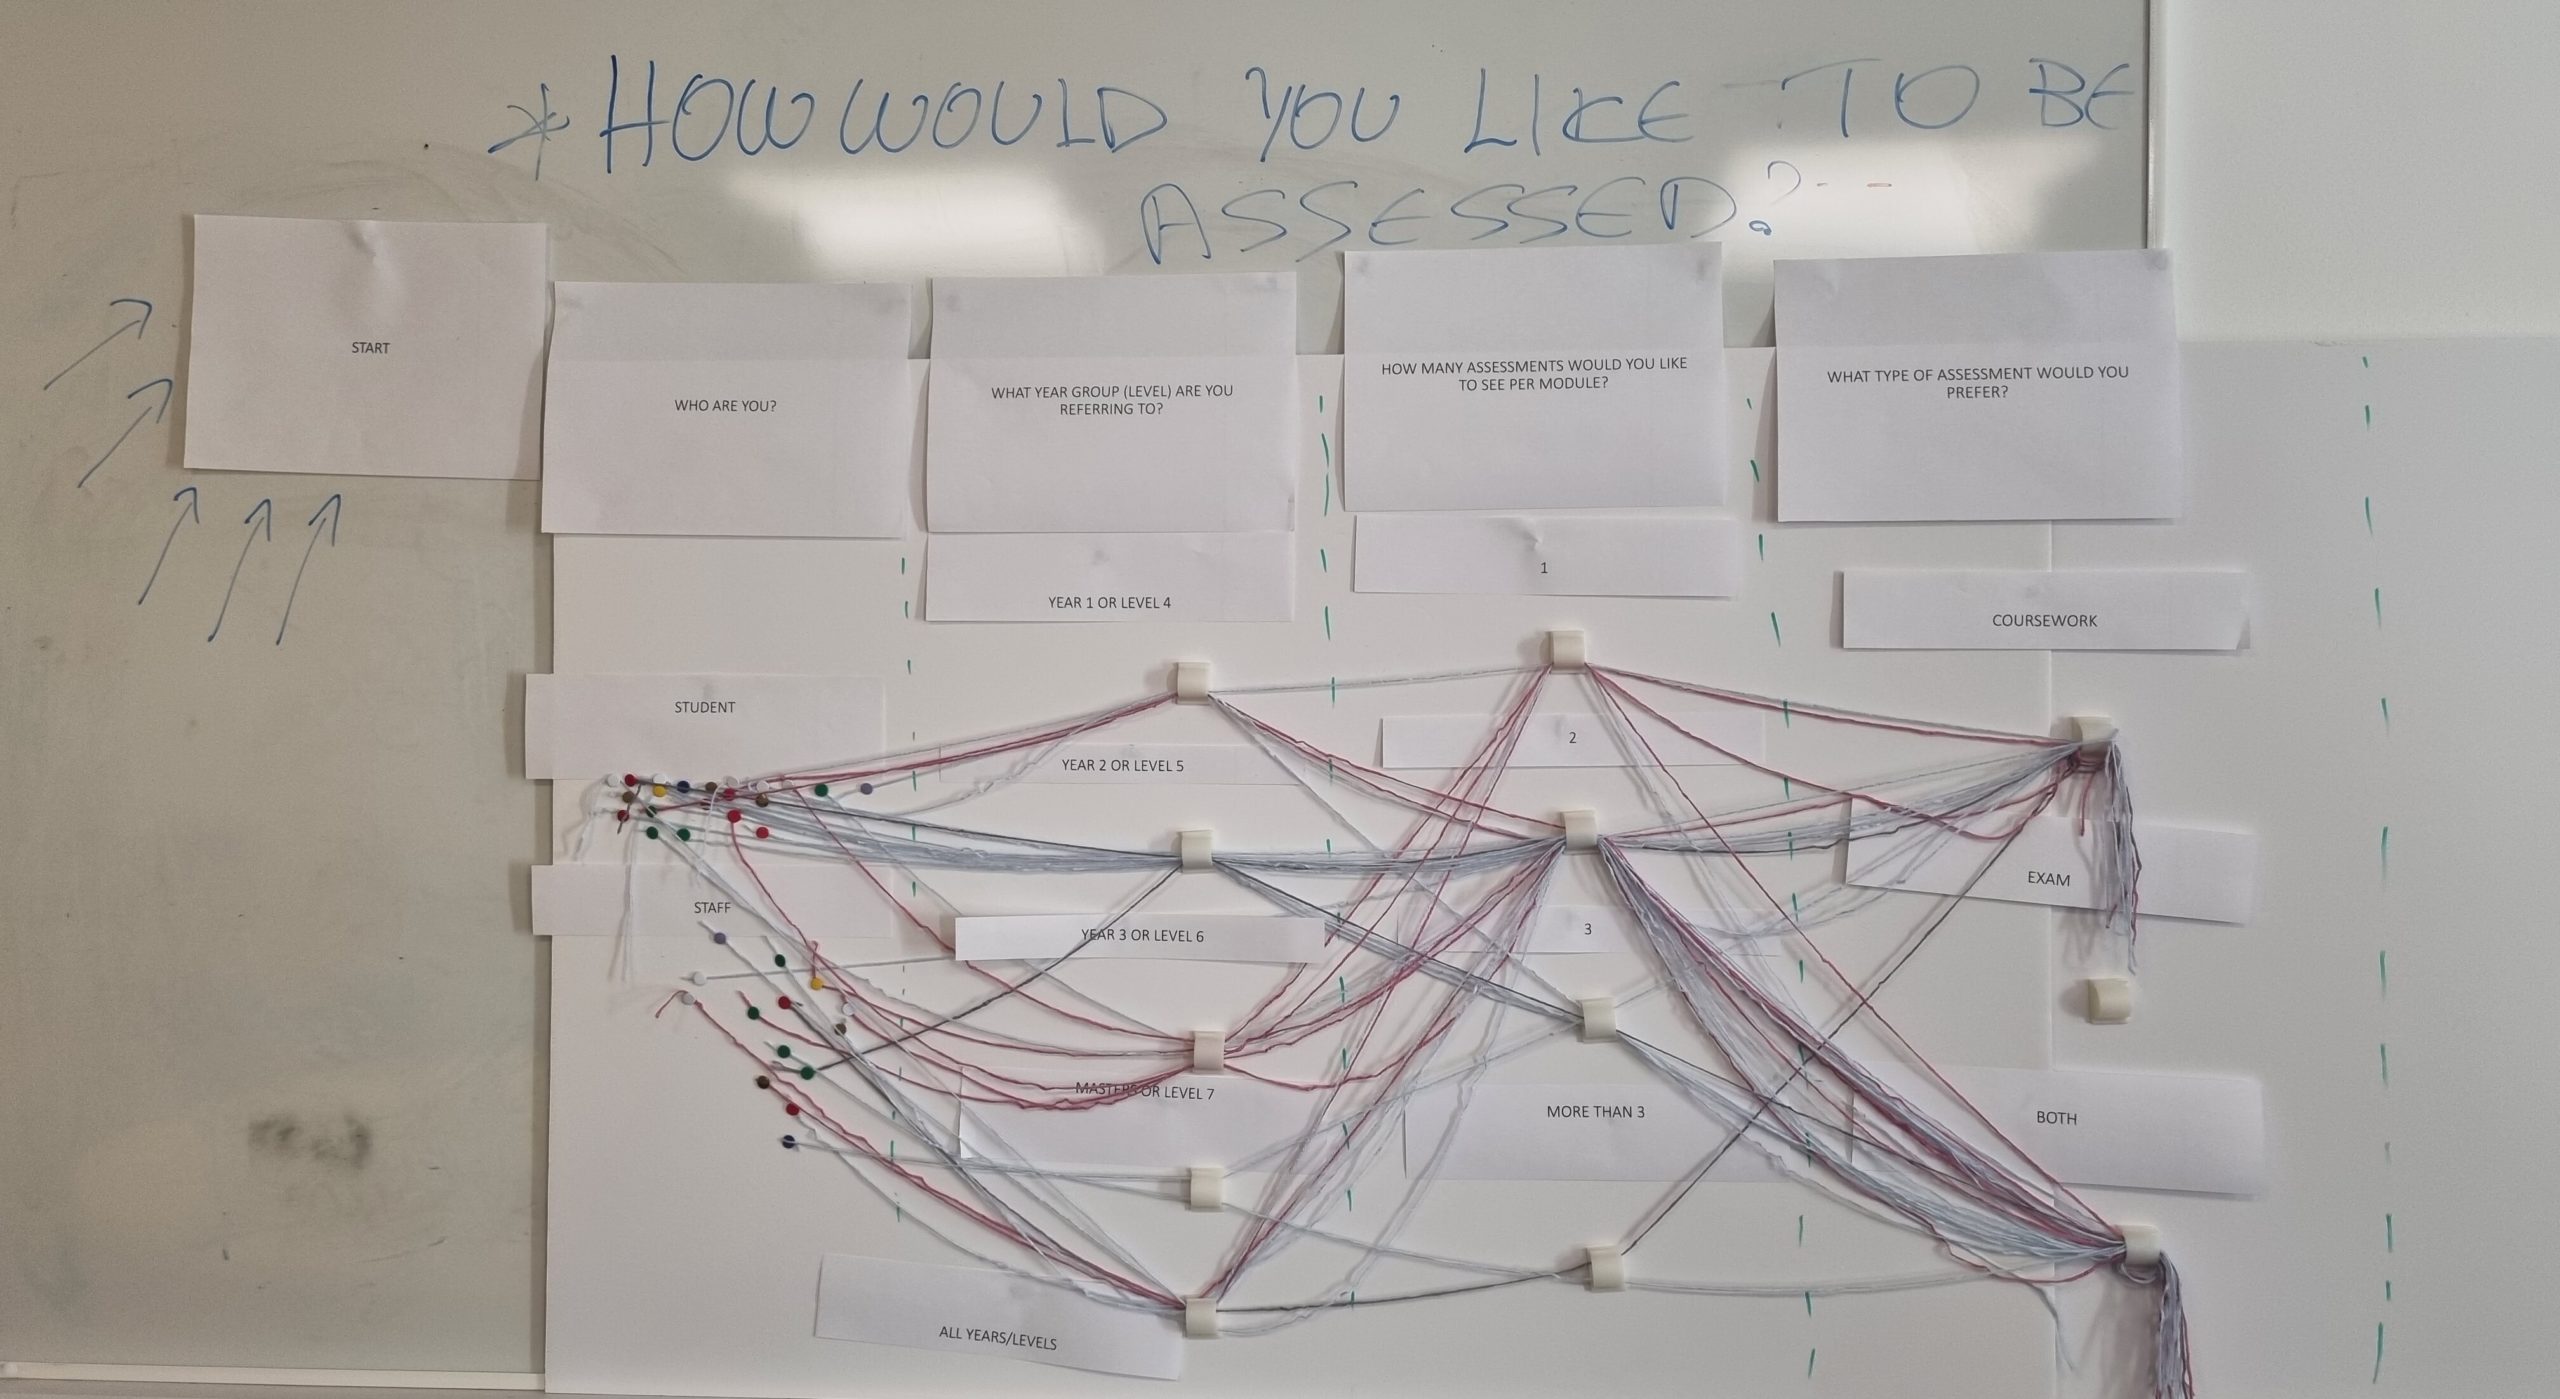 A slightly more zoomed in photo of the wall with the strings. The strings create a type of Sankey diagram. The strings start on the far left, grouped as either student or staff, then proceed to the next column in the grid—year group they are representing—then travel to a third column with options for number of assessments, and finally end at the type of preferred assessment (coursework, exam or both.)